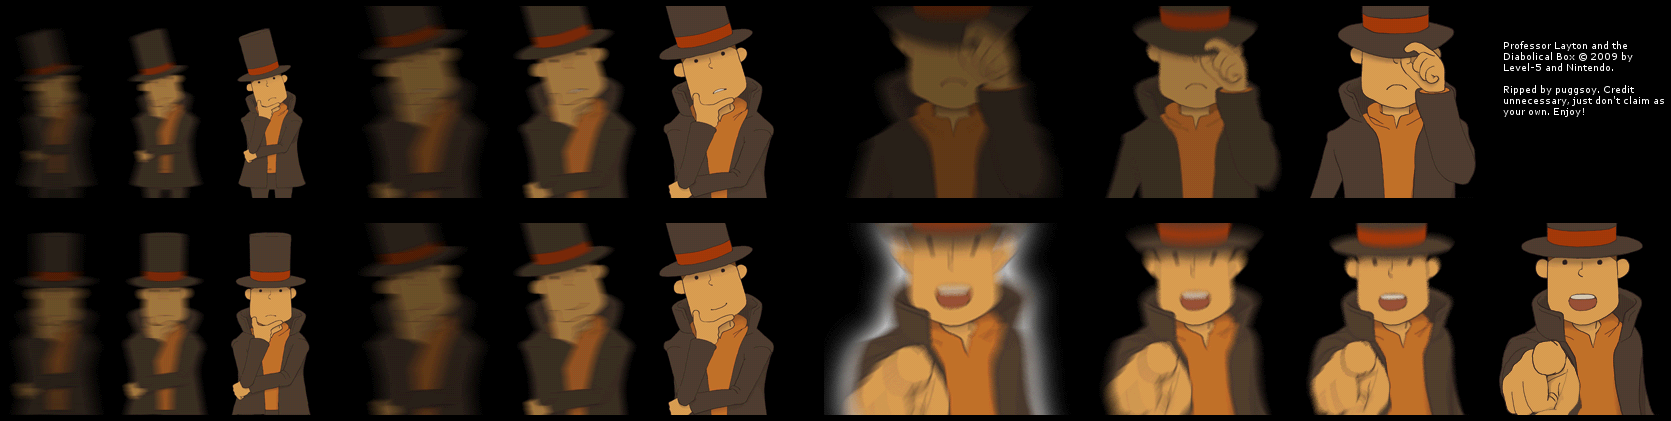 Professor Layton and the Diabolical Box - Layton Puzzle Answer